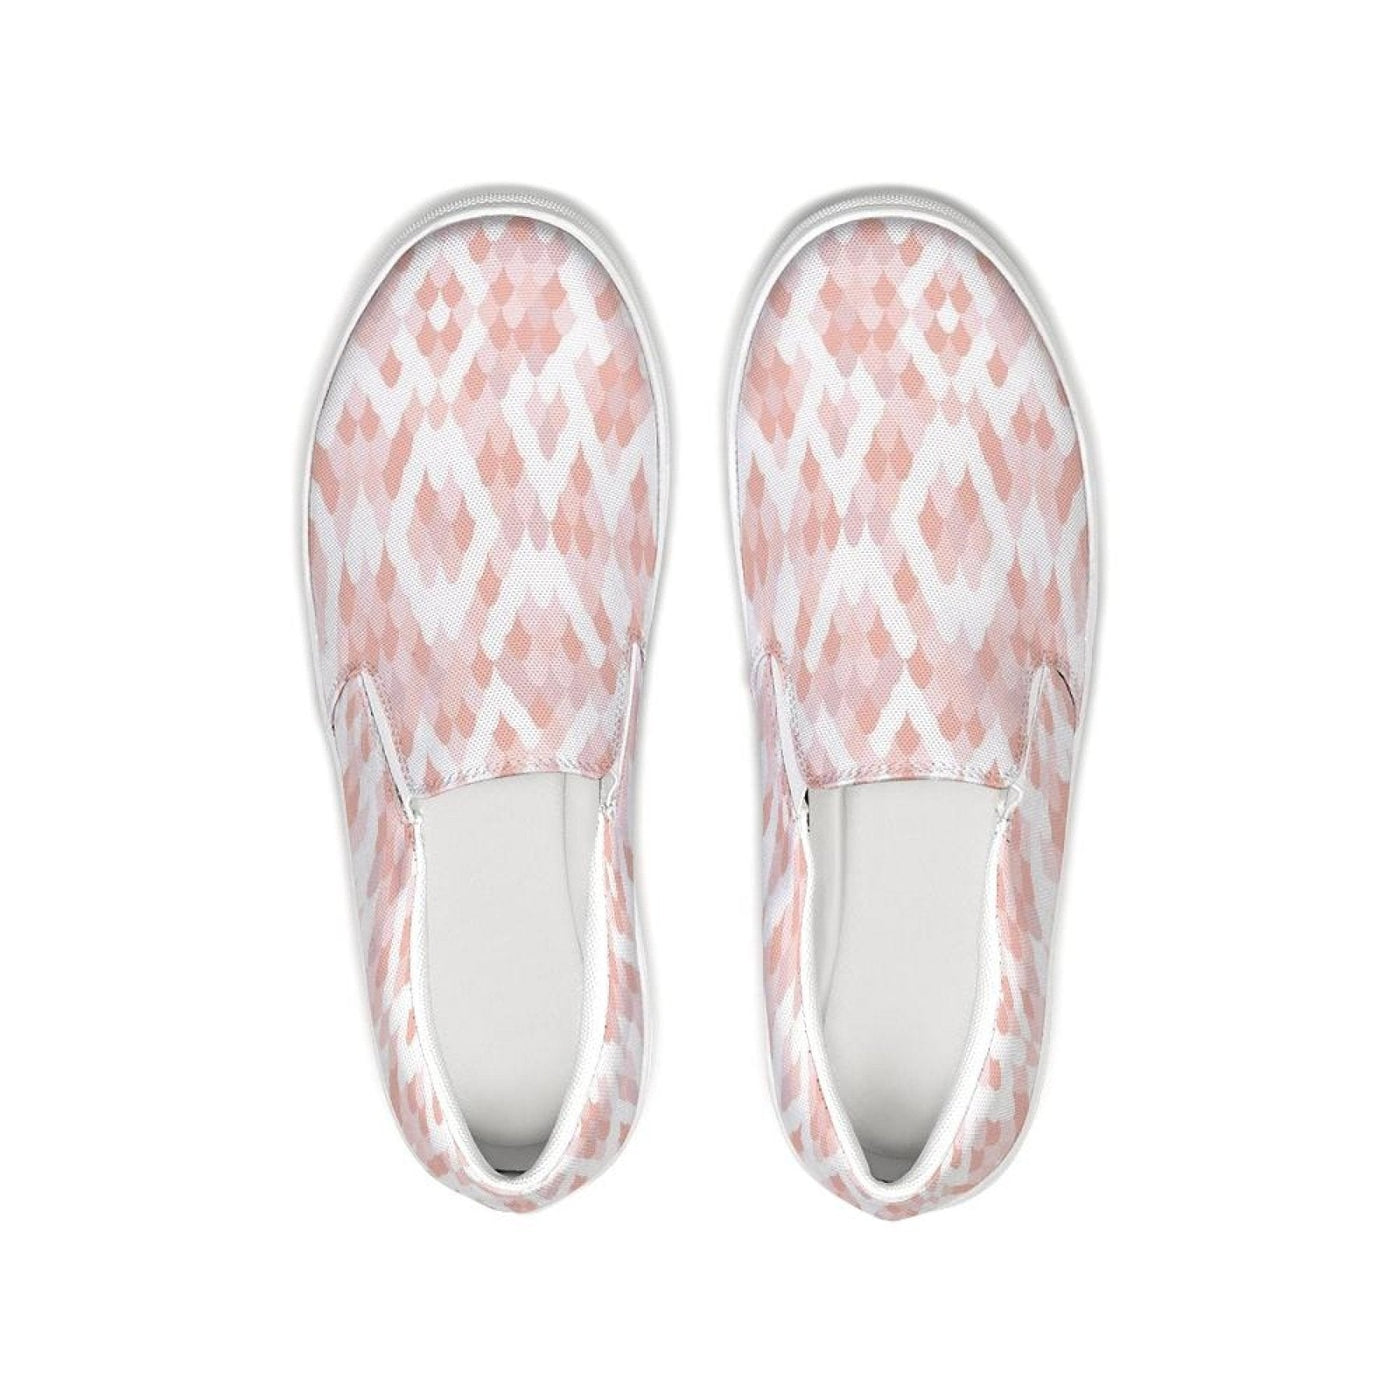 Womens Sneakers - Pink & White Low Top Slip-on Canva Shoes - Womens | Sneakers